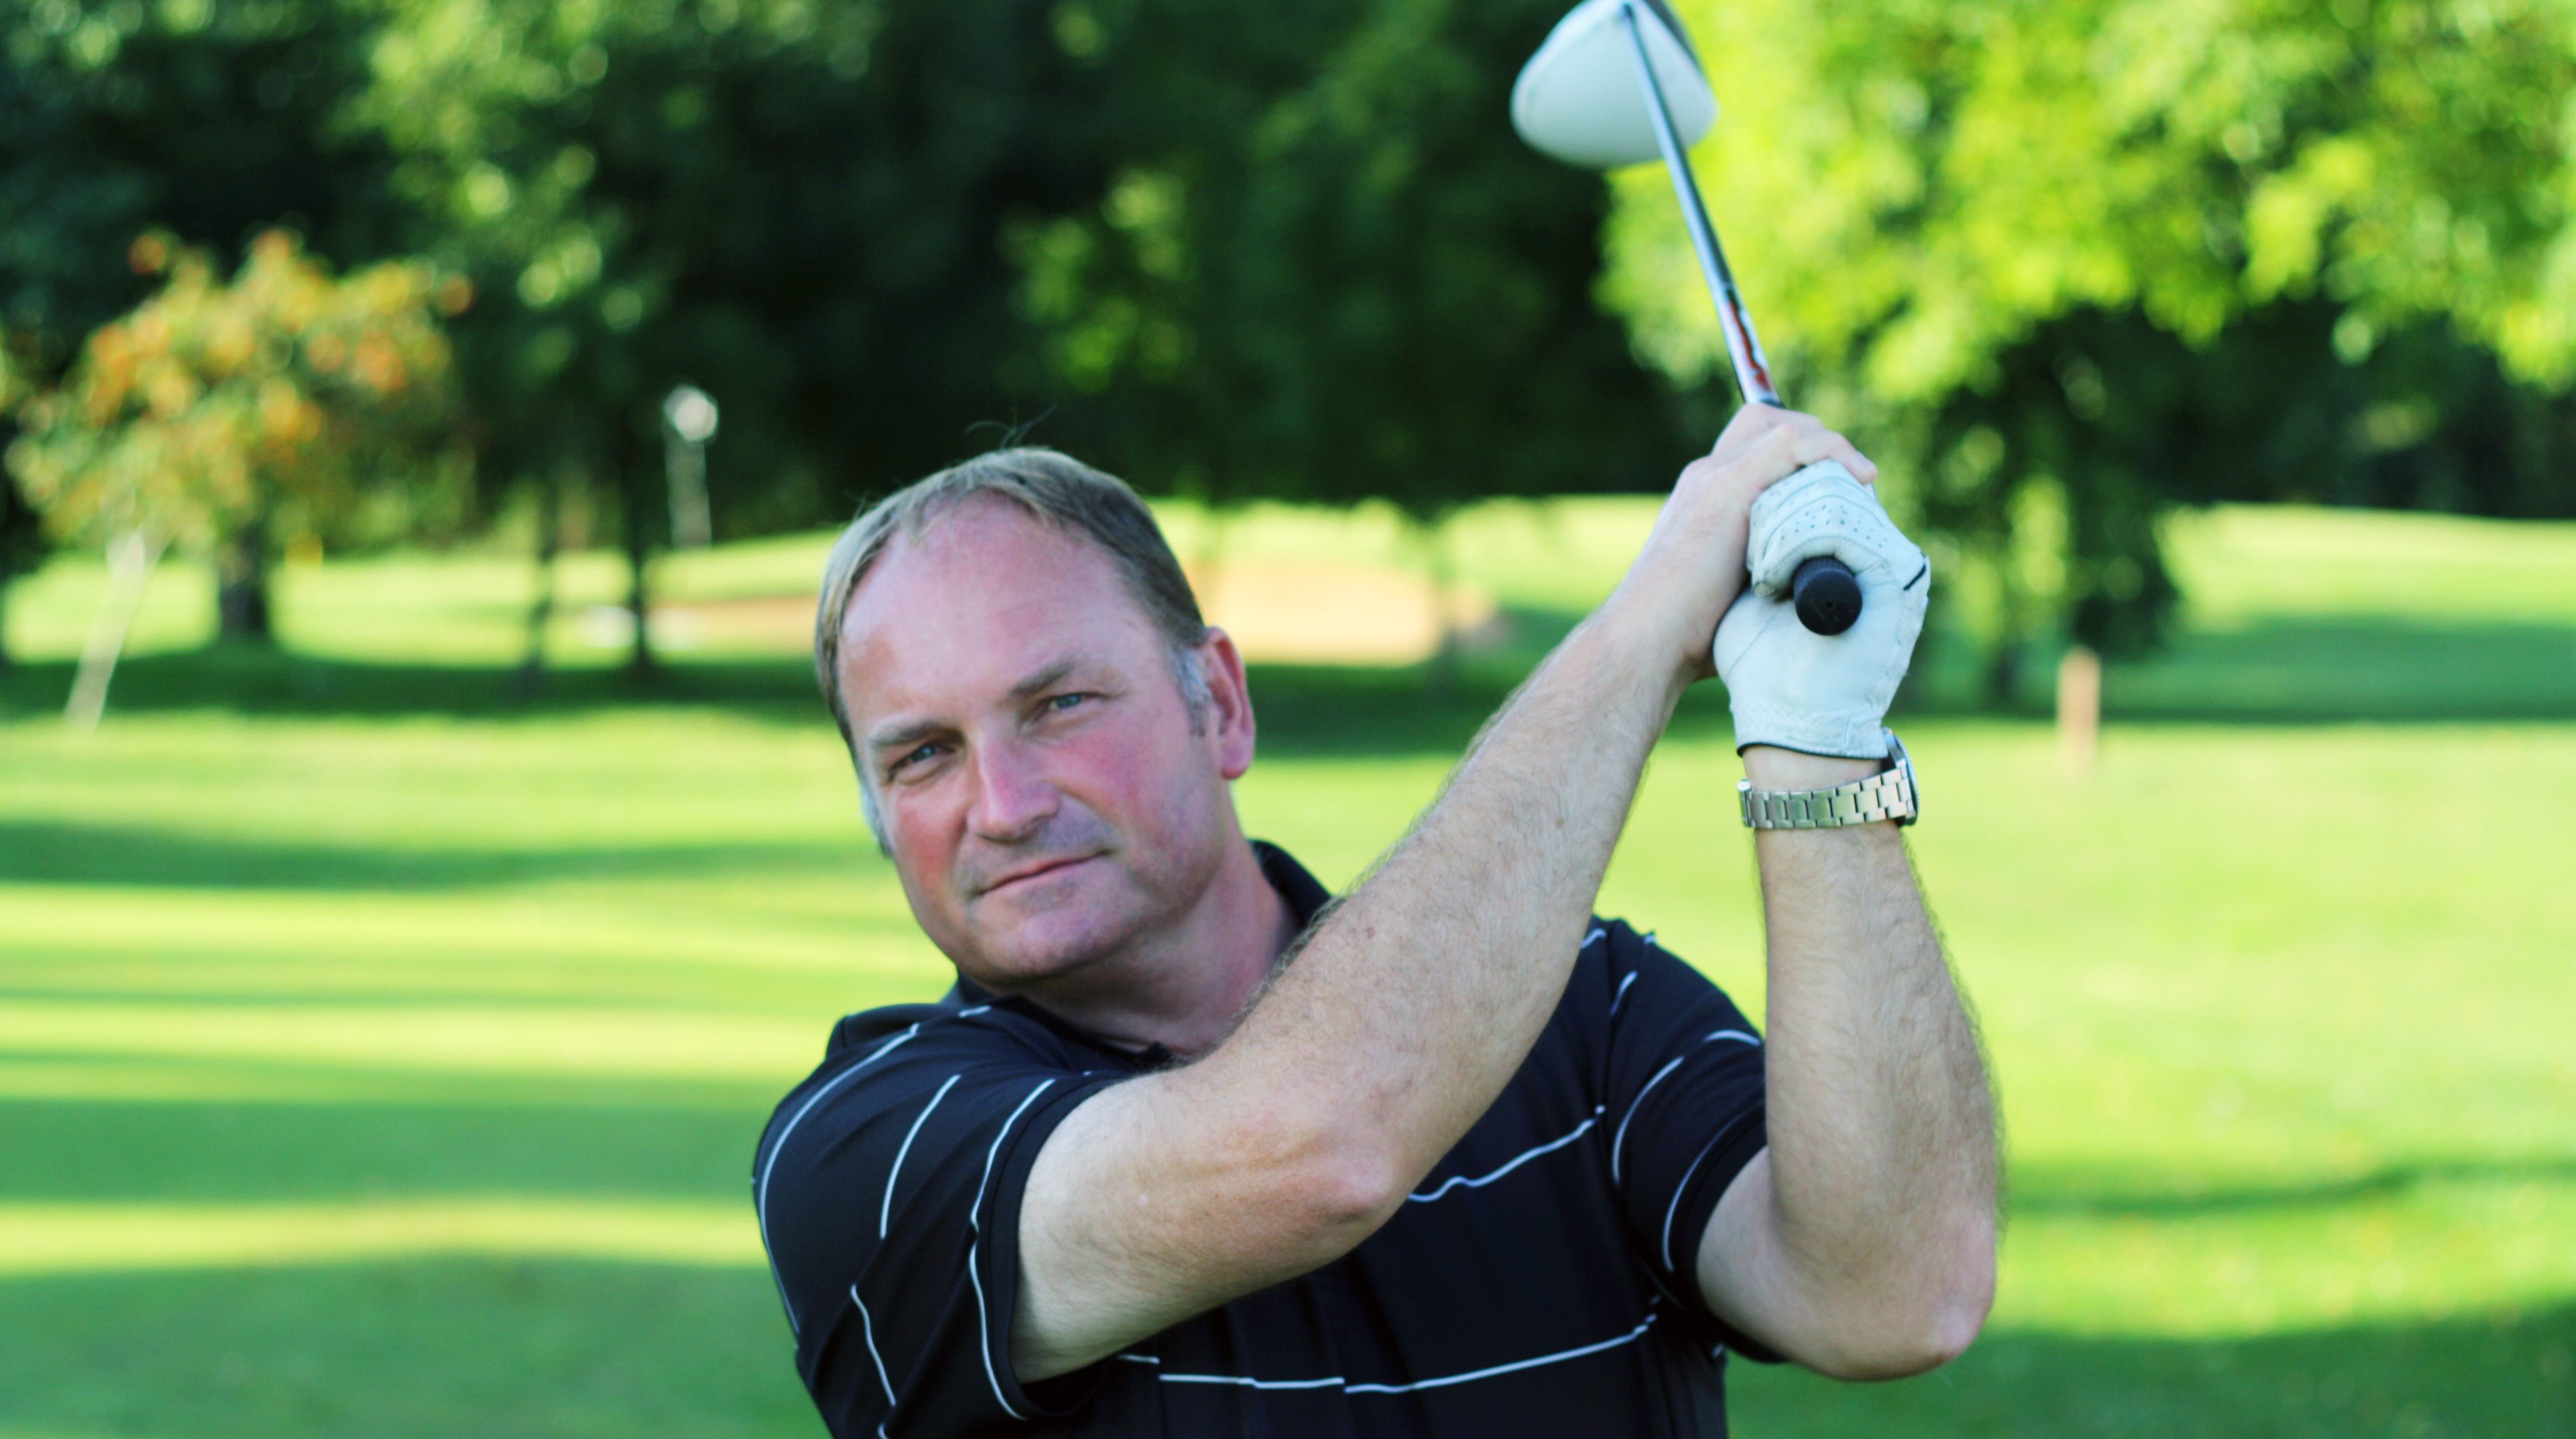 Mark Grieve Appointed General Manager at Datchet Golf Club